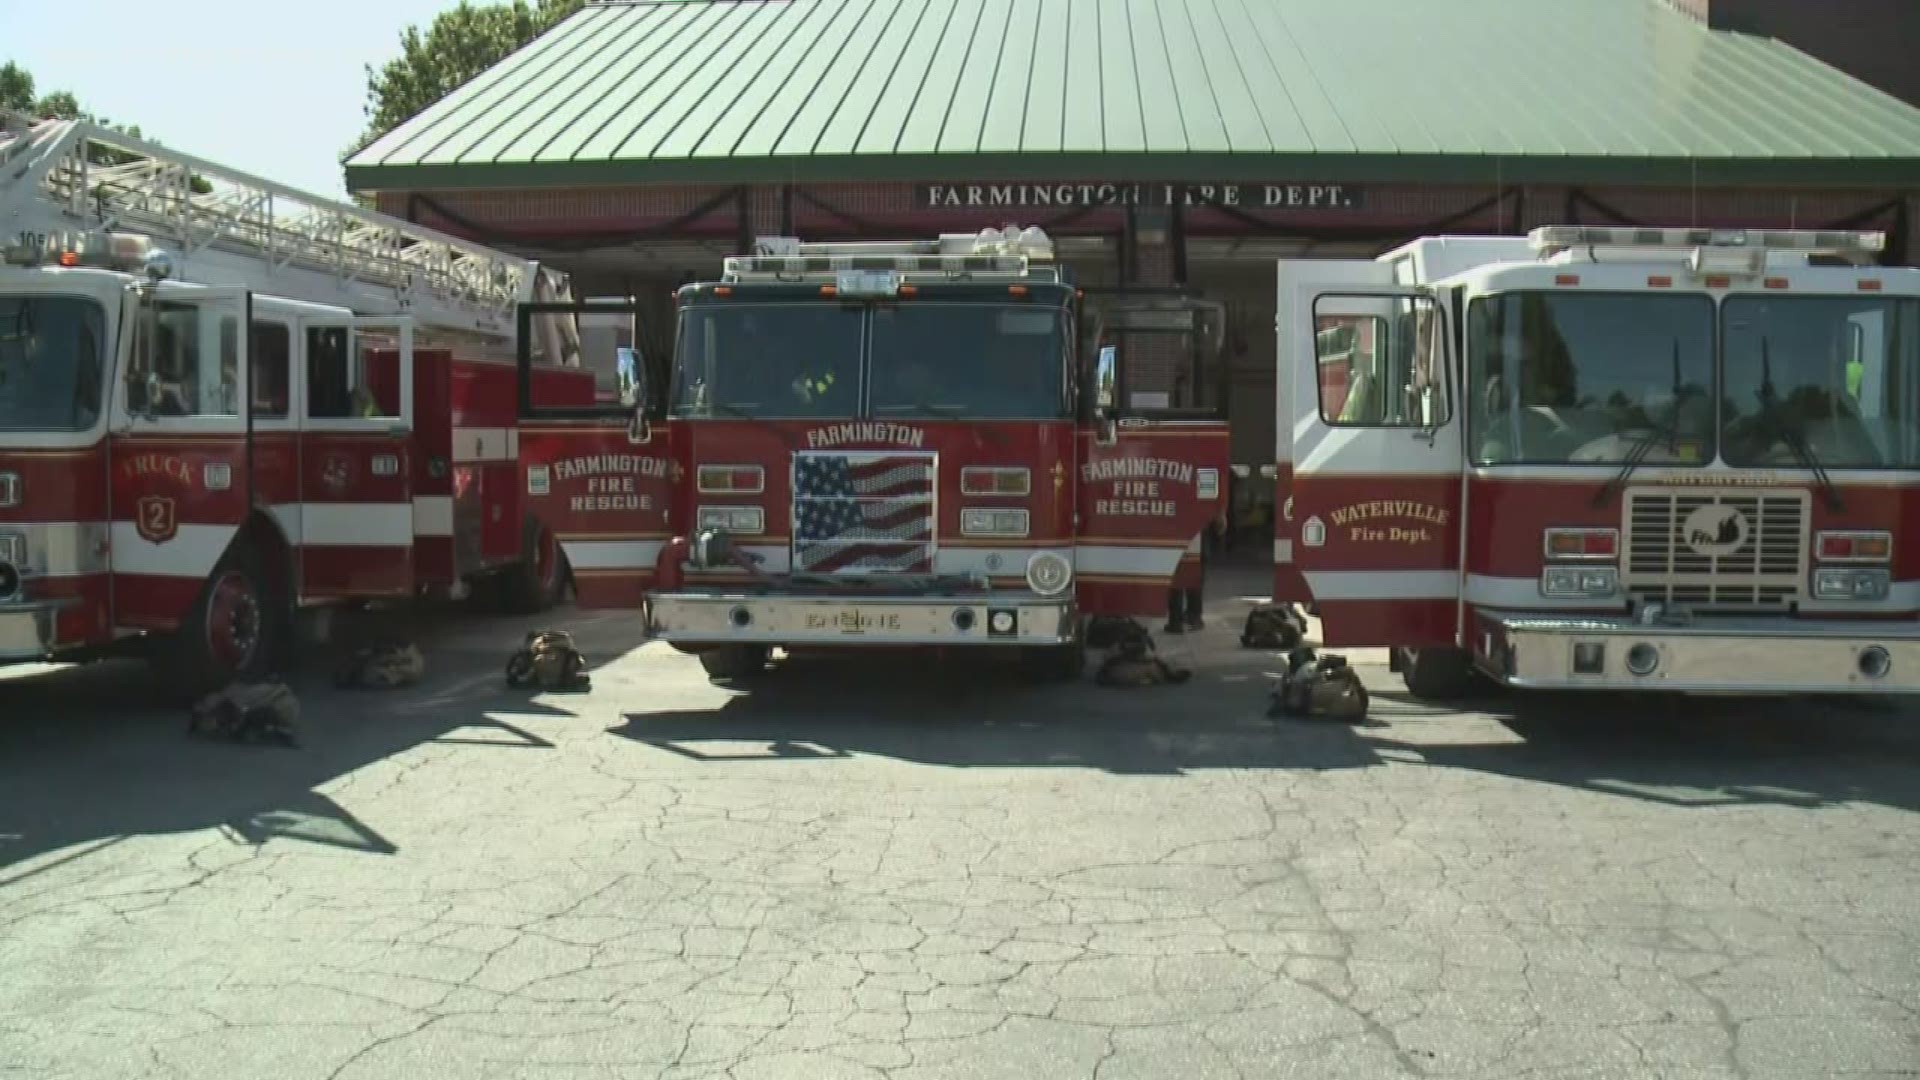 Fire departments from across the state of Maine in Farmington this week to assist with calls